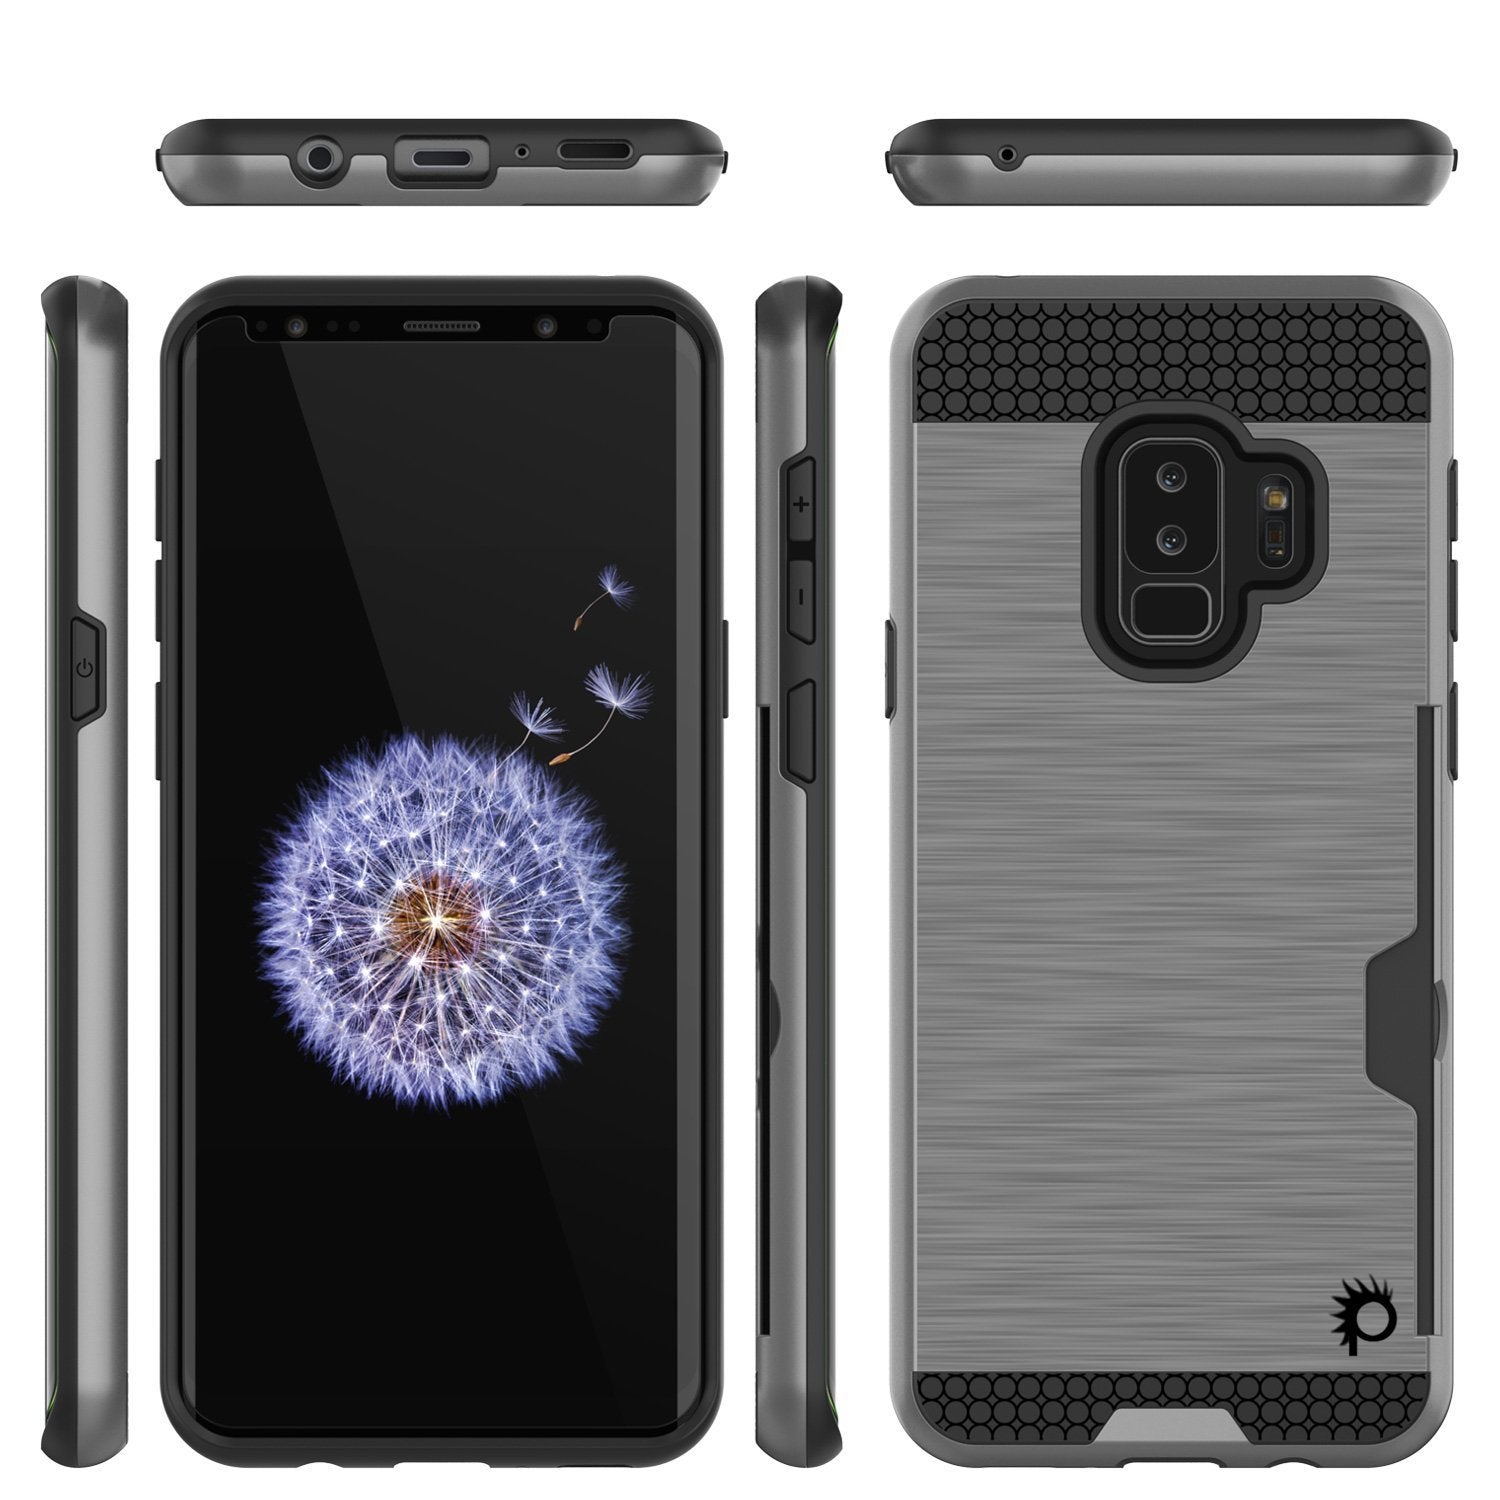 Galaxy S9 Plus Case, PUNKcase [SLOT Series] [Slim Fit] Dual-Layer Armor Cover w/Integrated Anti-Shock System [Grey] - PunkCase NZ